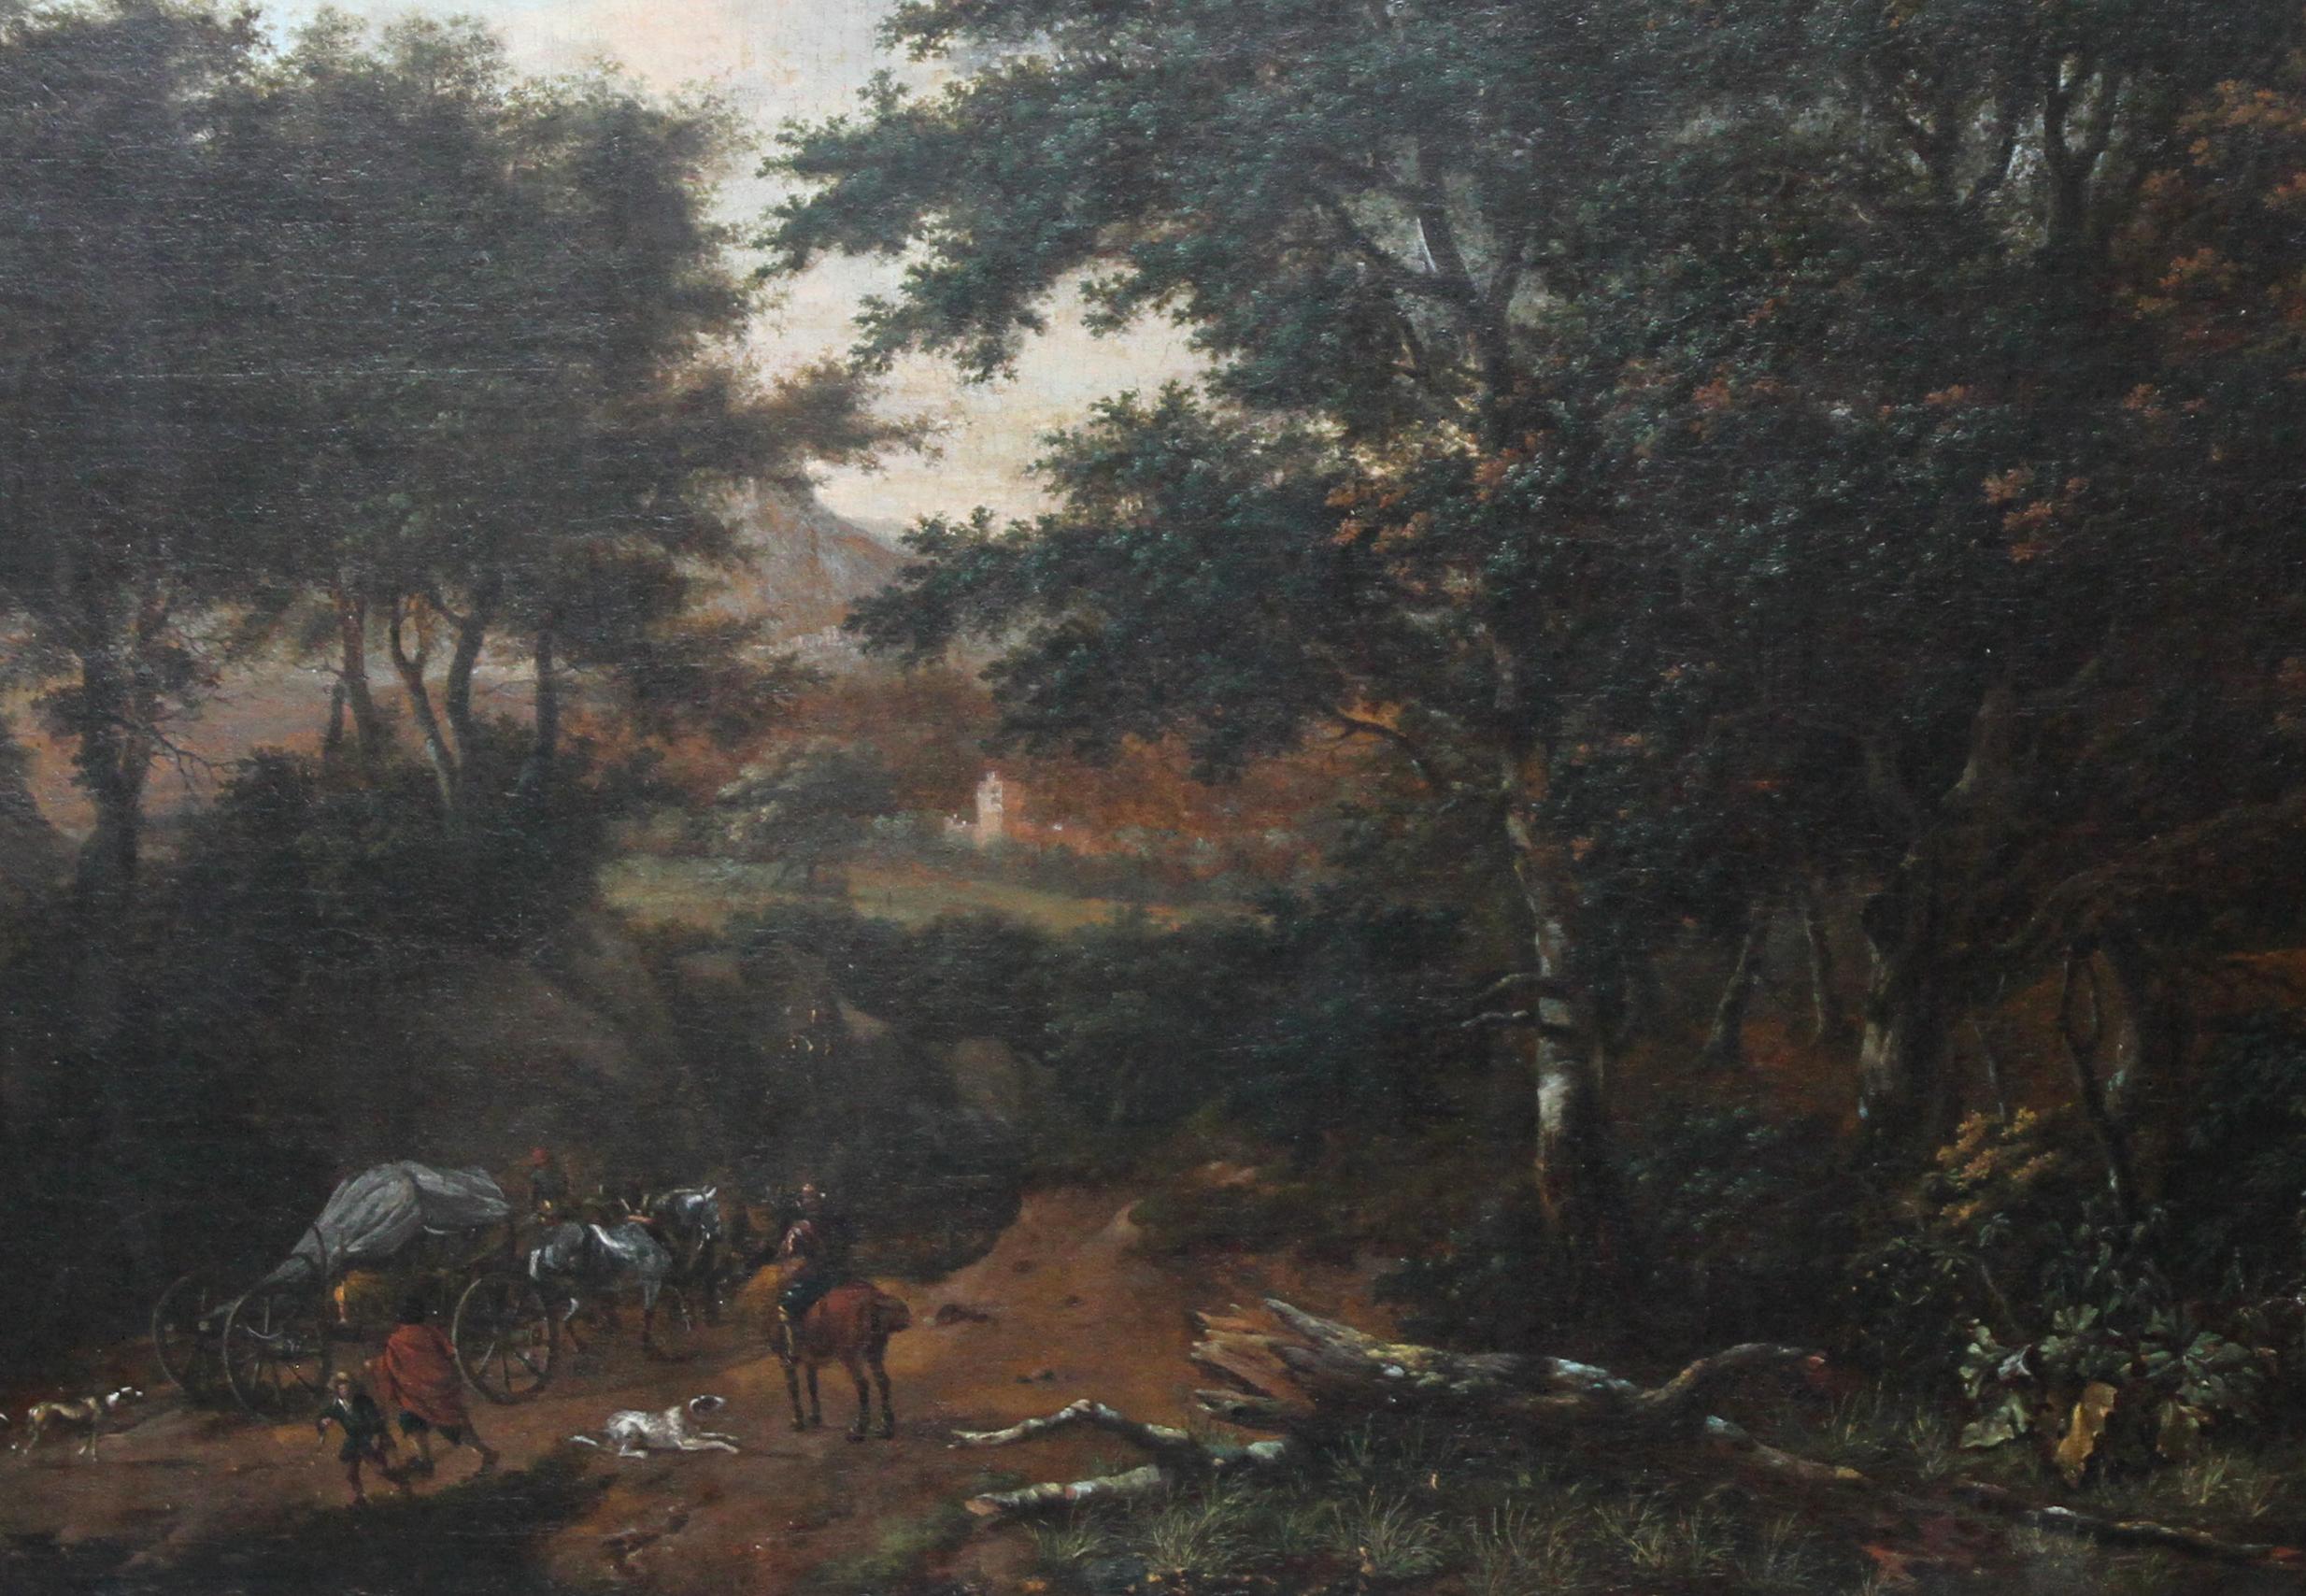 Travellers in Wooded Landscape - Dutch 17th century art Old Master oil painting - Old Masters Painting by Jan Wijnants (circle)